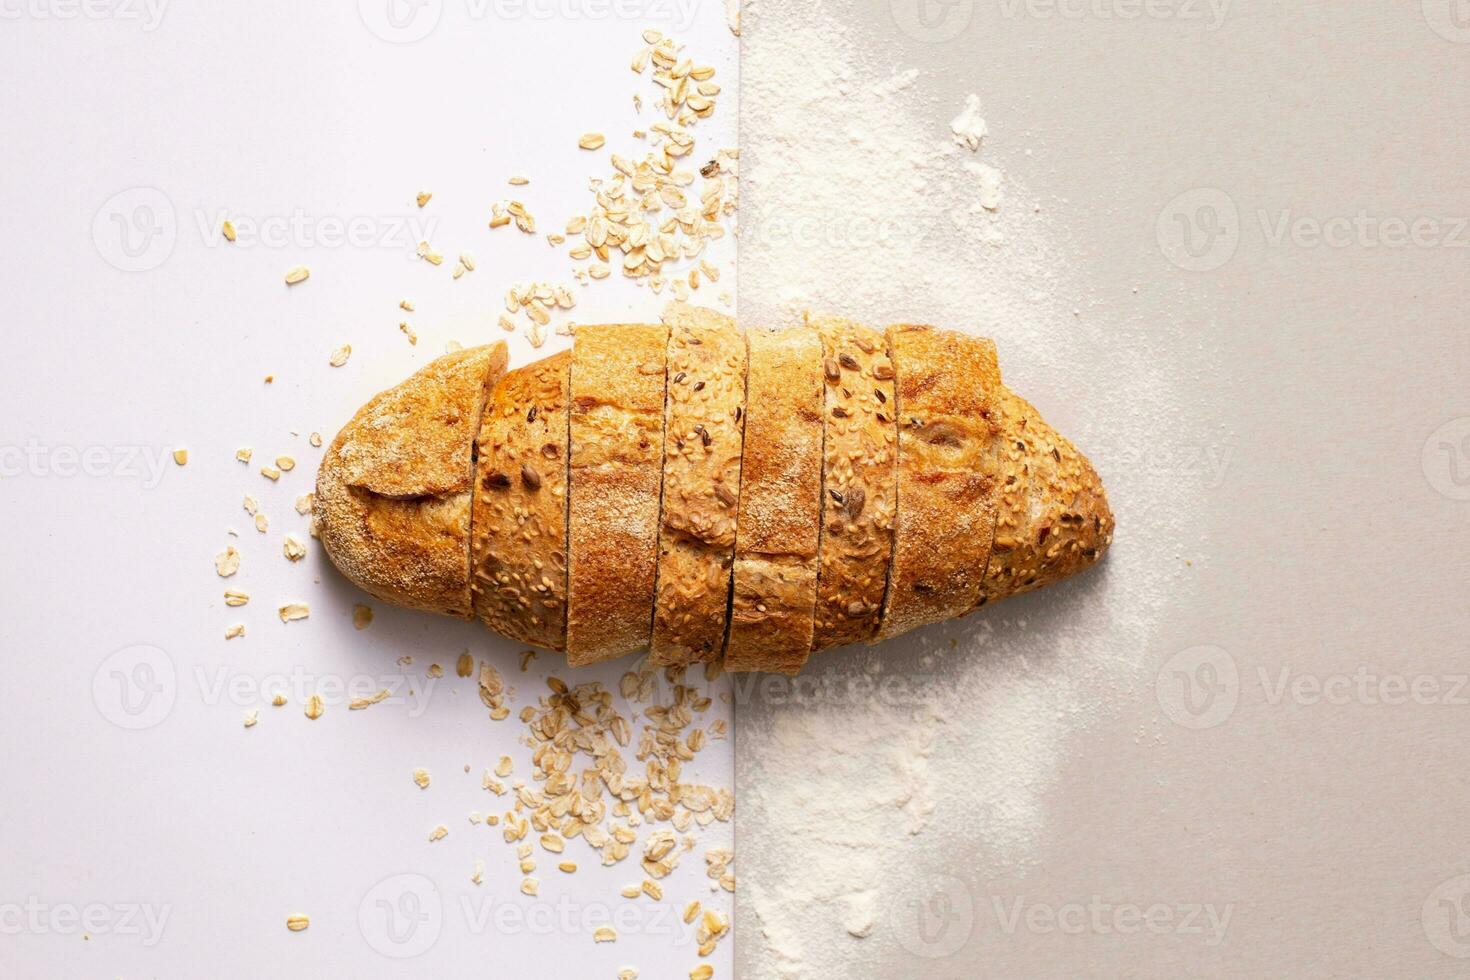 Loaf of bread with cereals on white background, top view photo